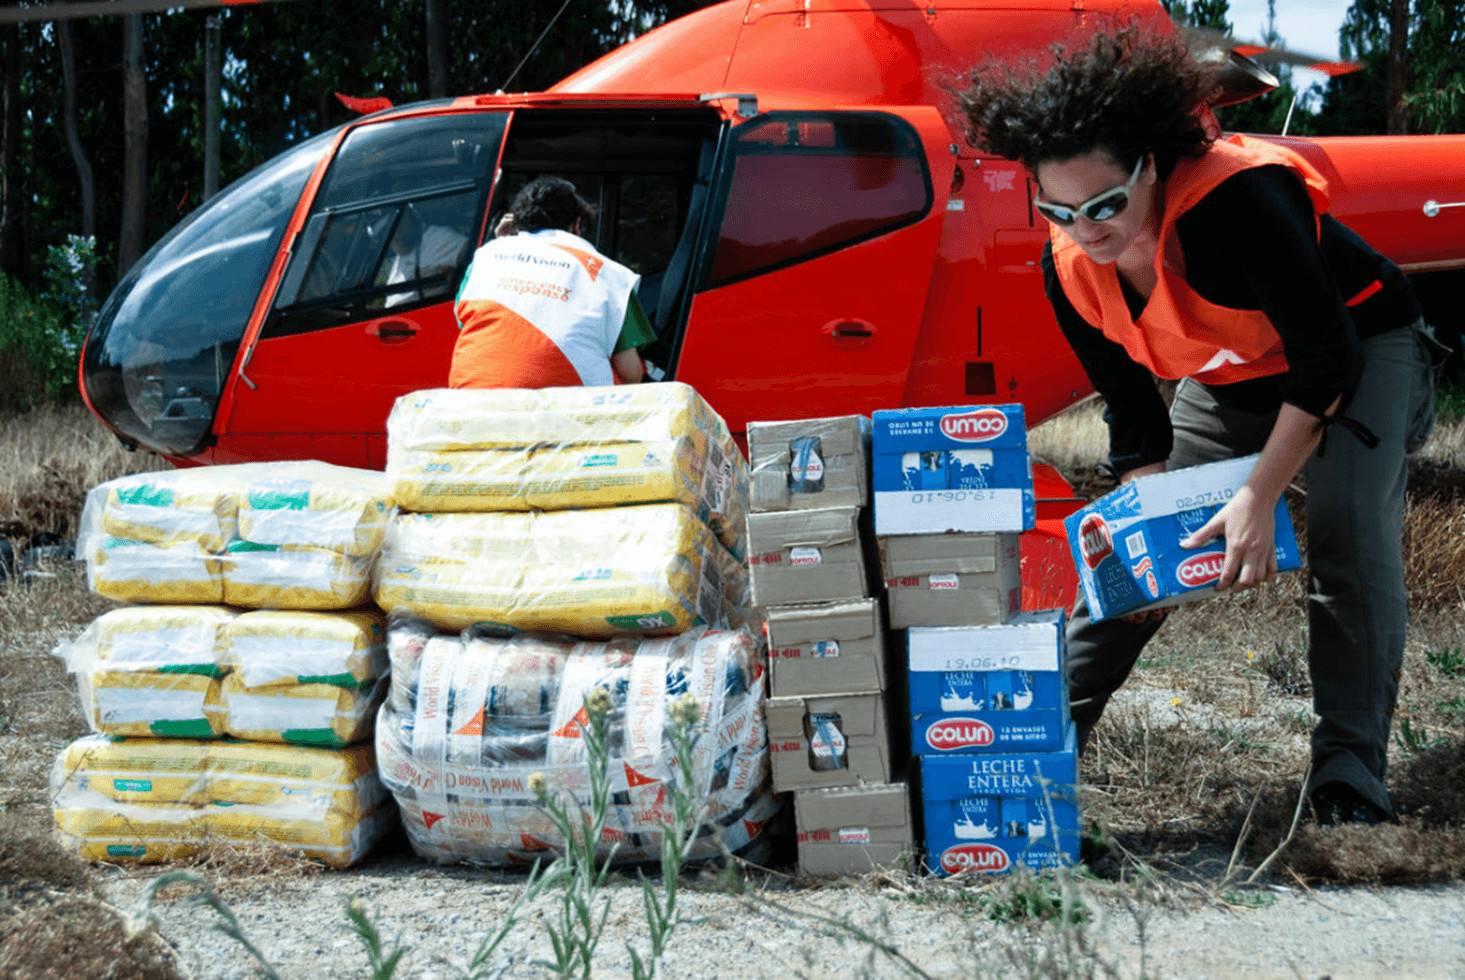 Two people in orange World Vision vests unload earthquake relief supplies from a helicopter.